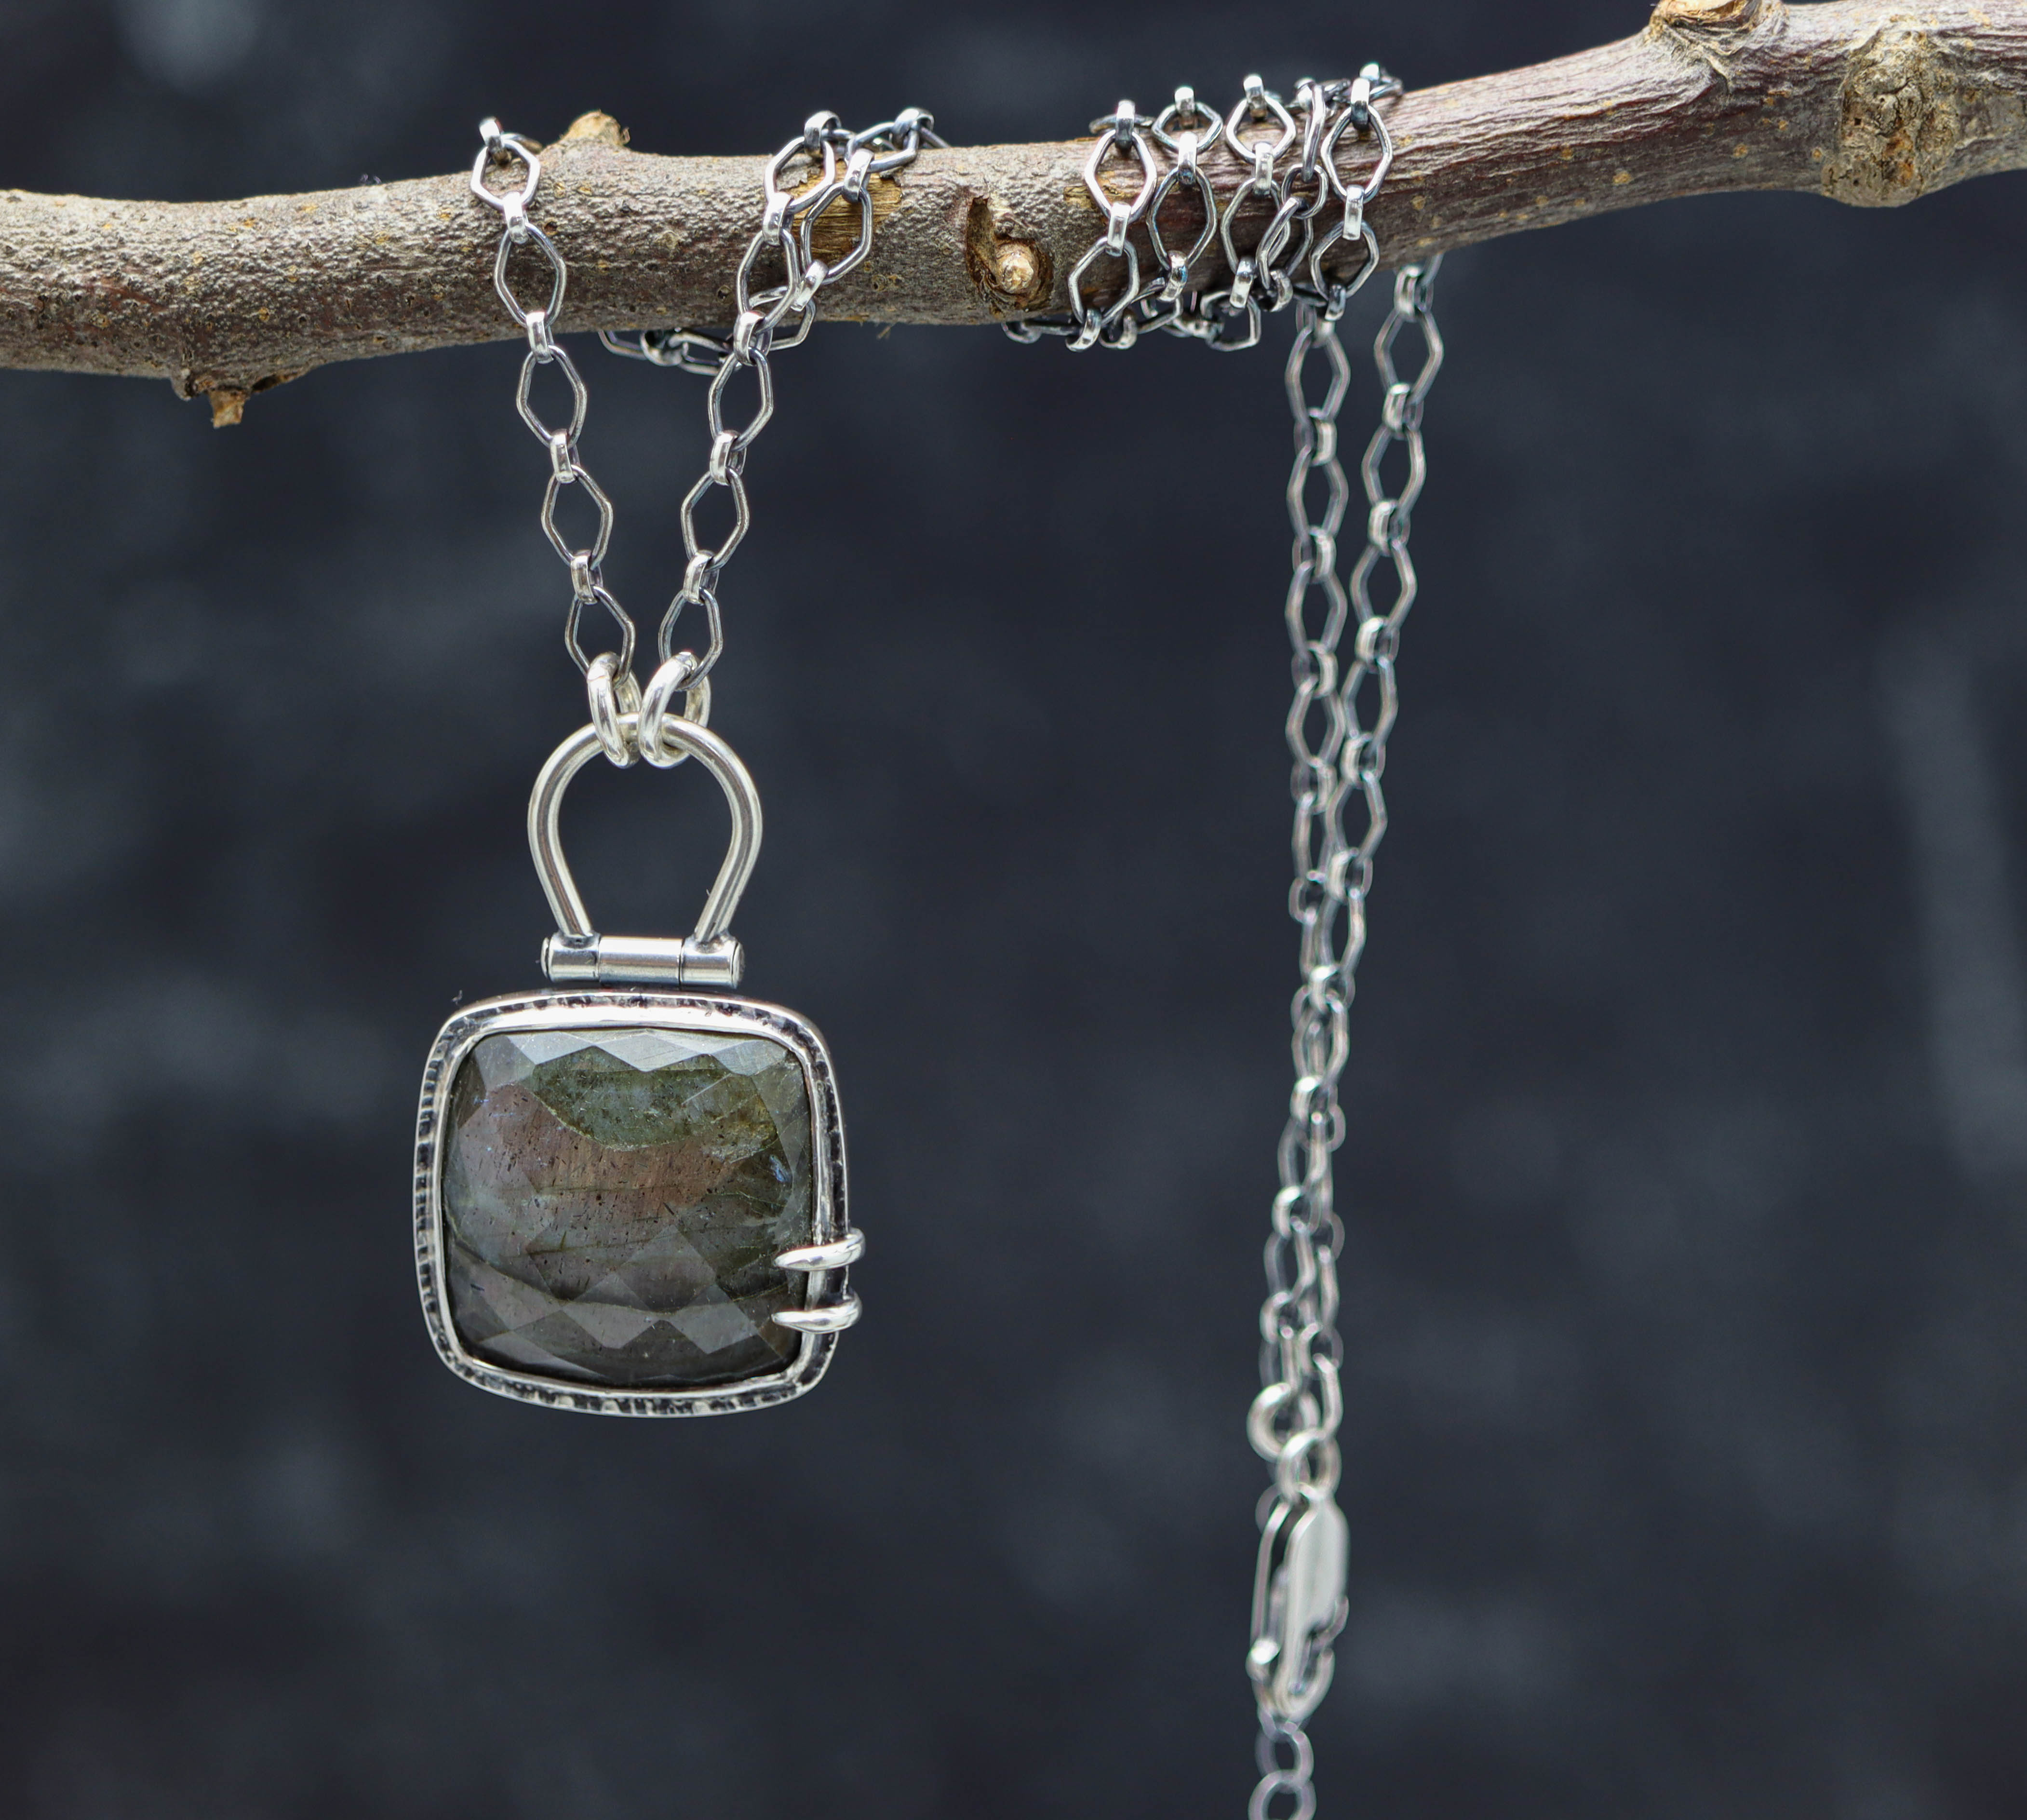 Flashy Labradorite Pendant Sterling Silver One Of a Kind Gemstone Necklace